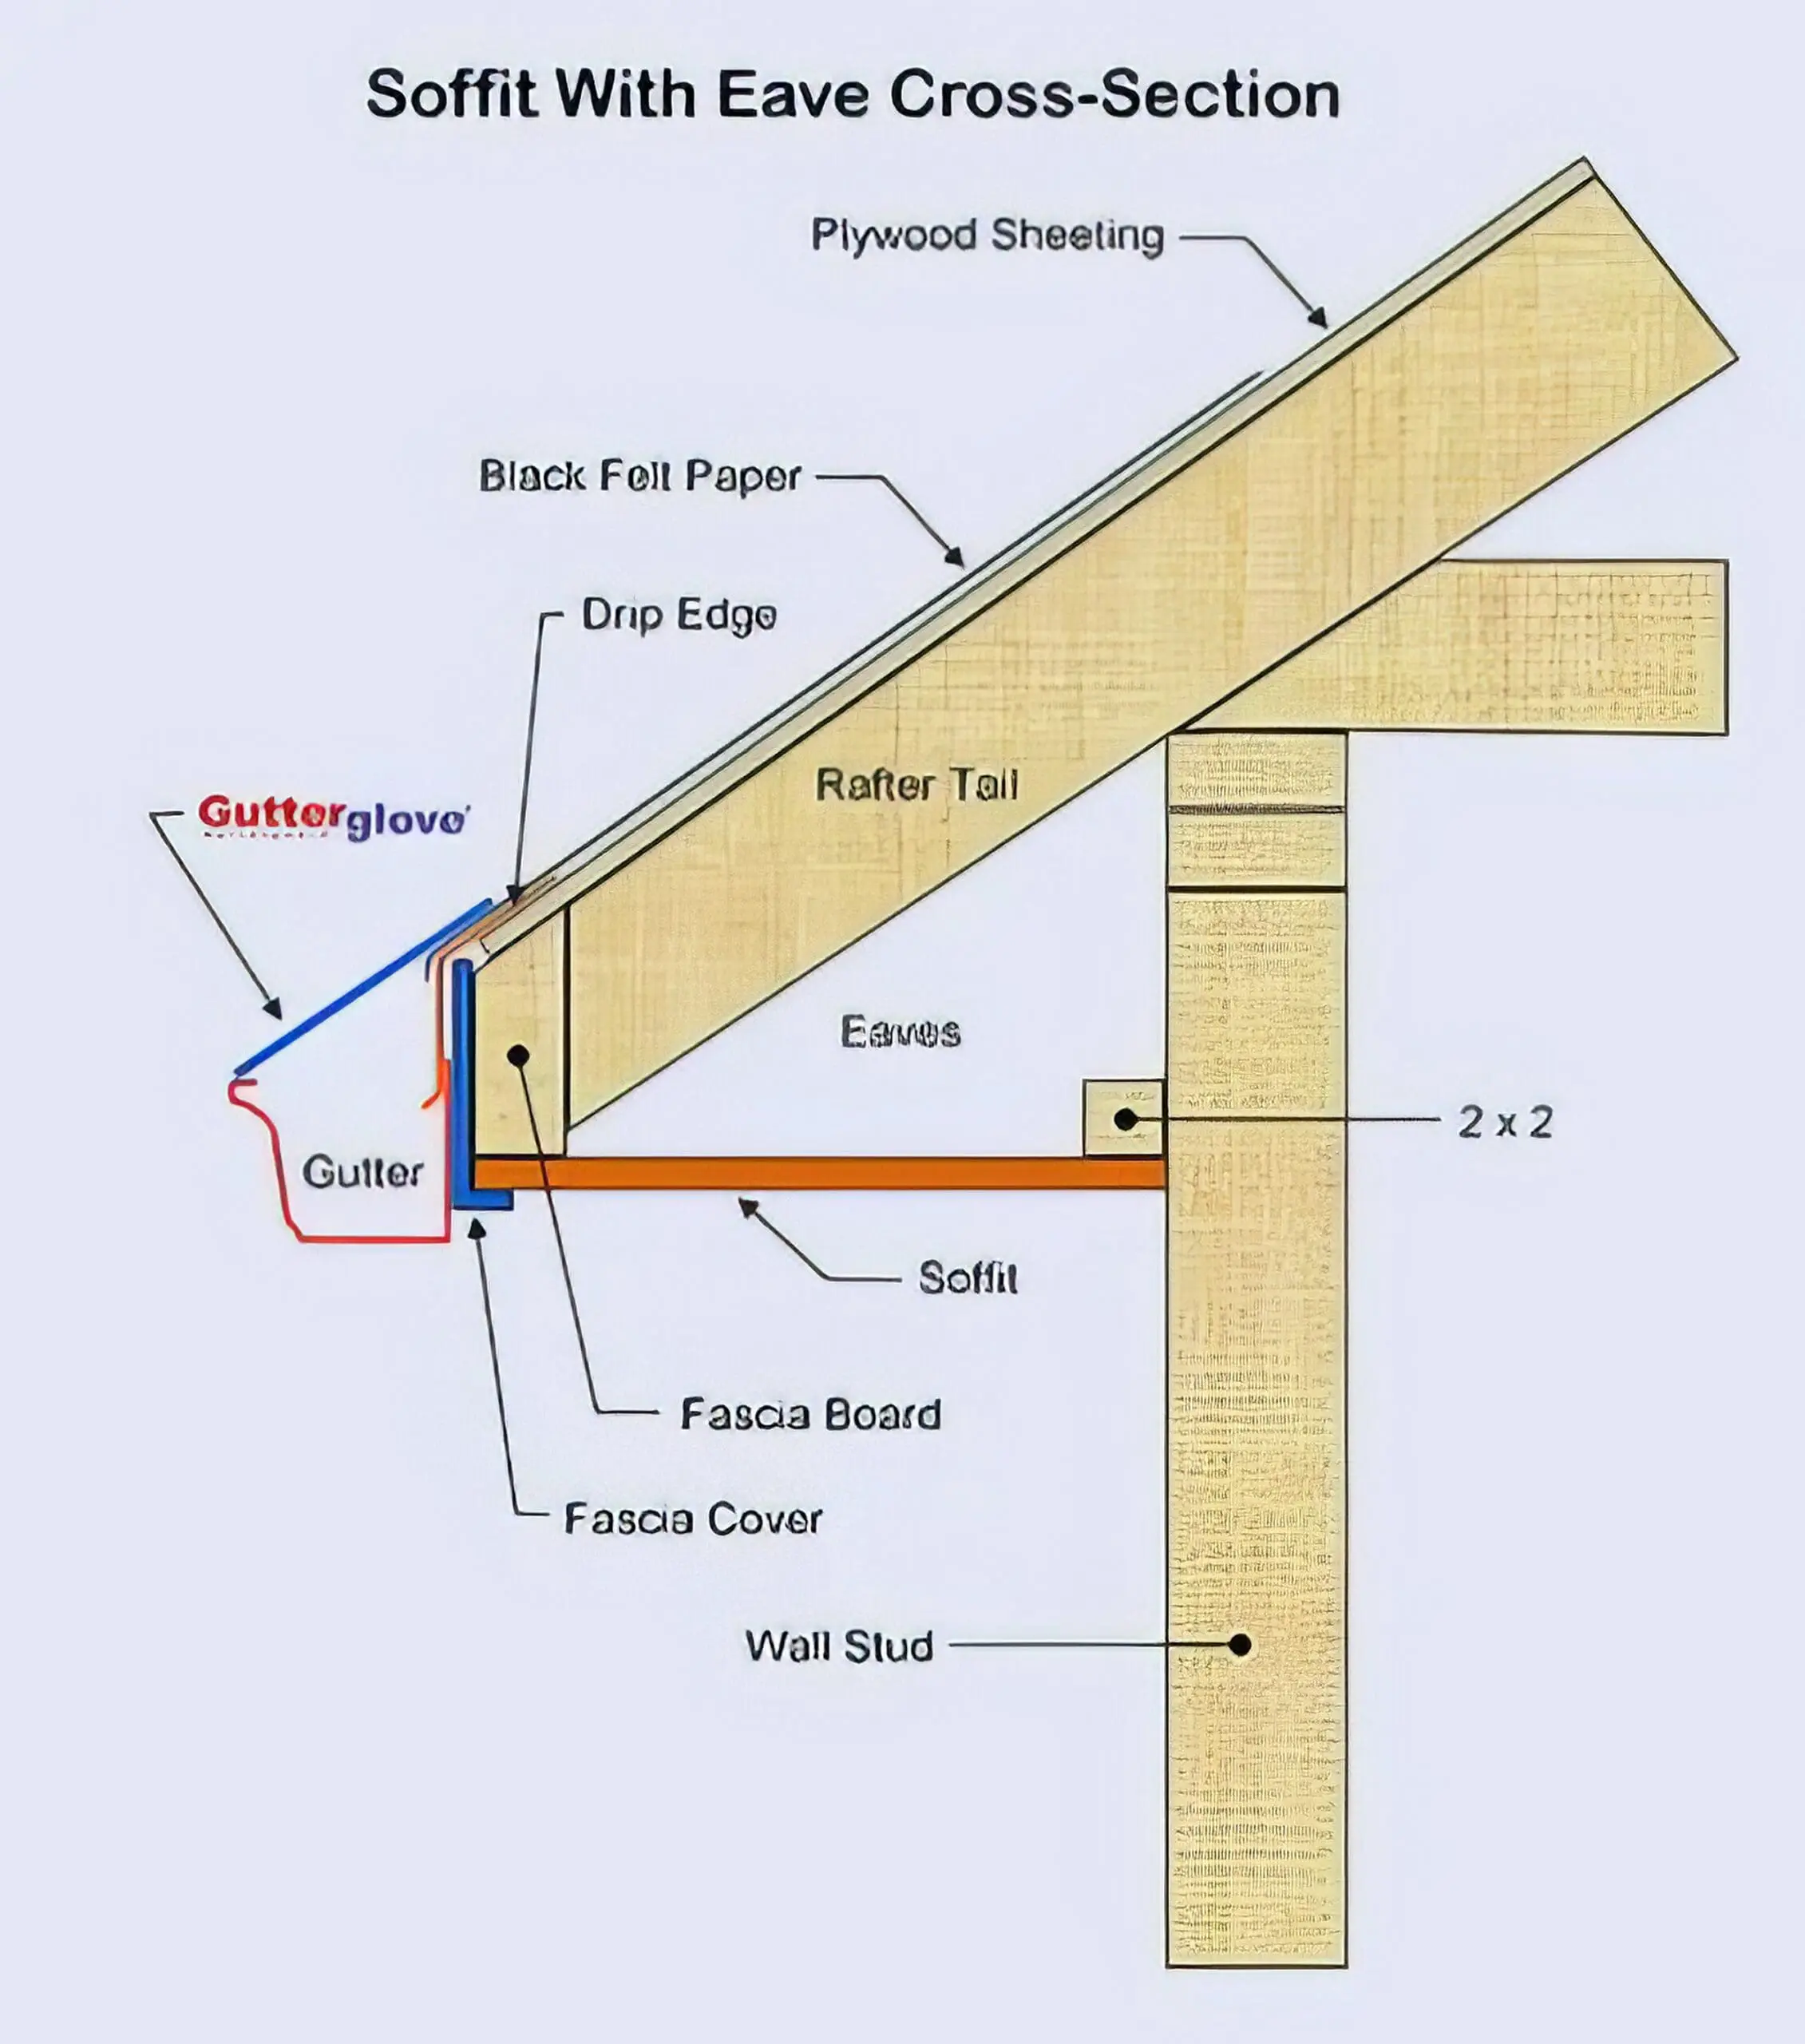 soffit with eave cross-section